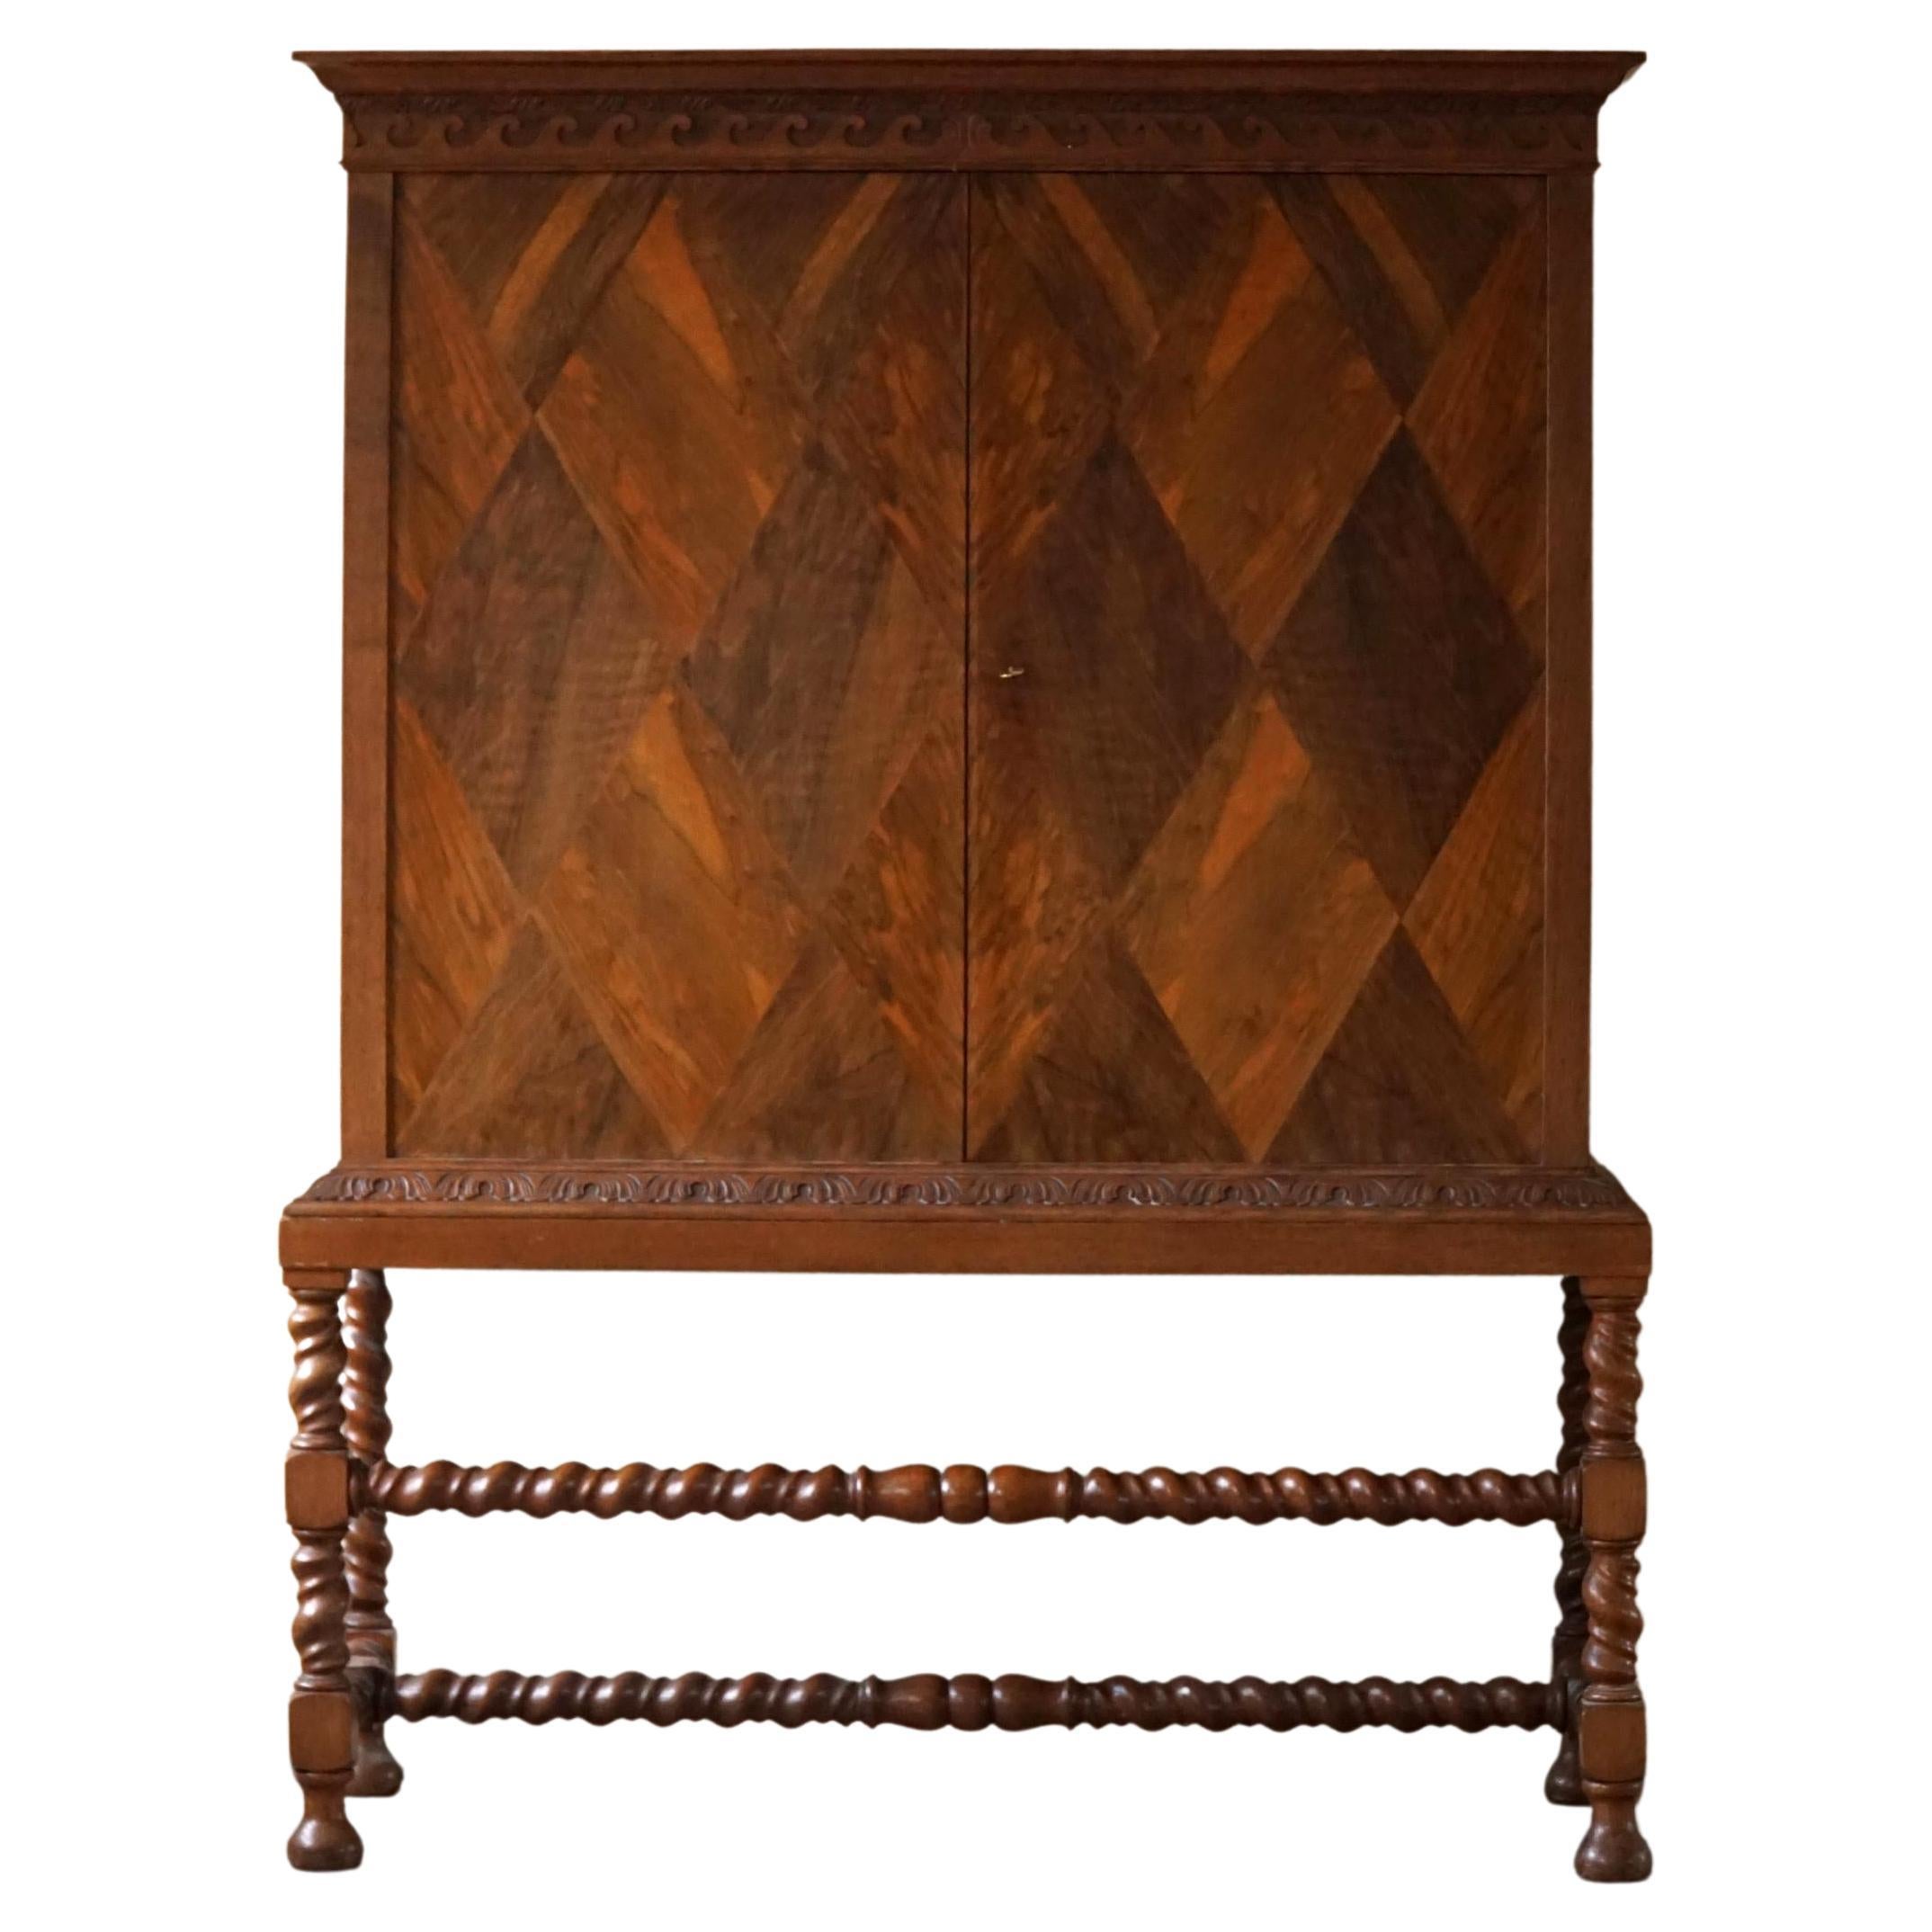 Otto Meyer, Harlequin Cabinet in Nutwood, Danish Modern, Made in 1926